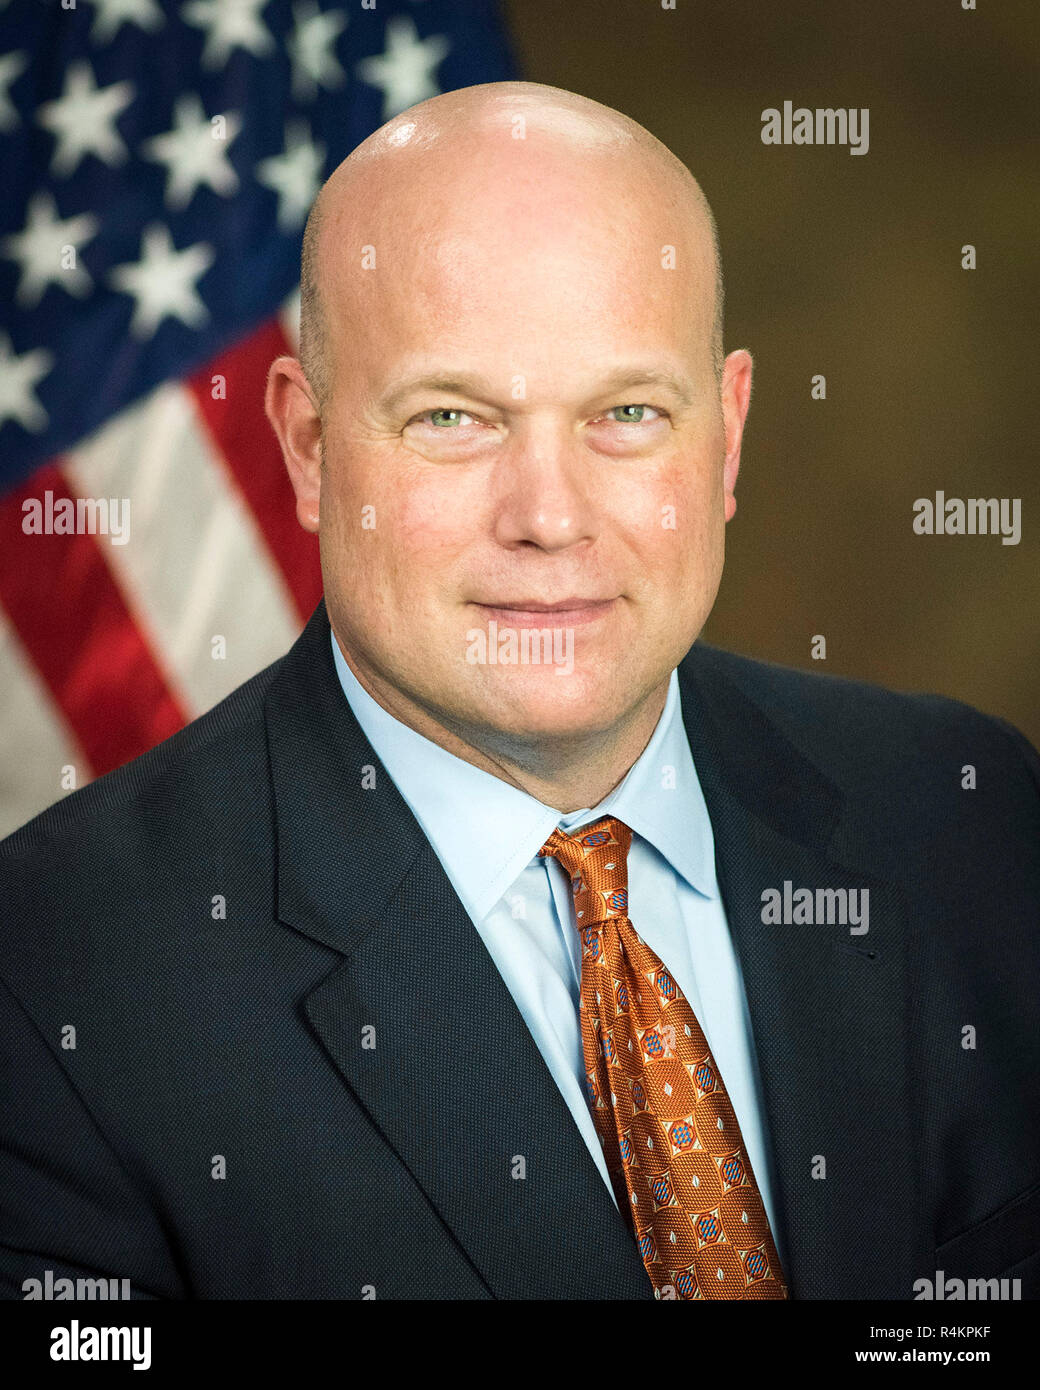 Matthew G. Whitaker is serving as Acting United States Attorney General.  Prior to becoming Acting Attorney General, Mr. Whitaker served as Chief of Staff to Attorney General Jeff Sessions. He was appointed as the U.S. Attorney for the Southern District of Iowa on June 15, 2004 by President George W. Bush. While U.S. Attorney, he served on the Controlled Substances and Asset Forfeiture Subcommittee of the Attorney General's Advisory Committee and was a member of both the White Collar Crime Subcommittee and the Violent and Organized Crime Subcommittee. Stock Photo